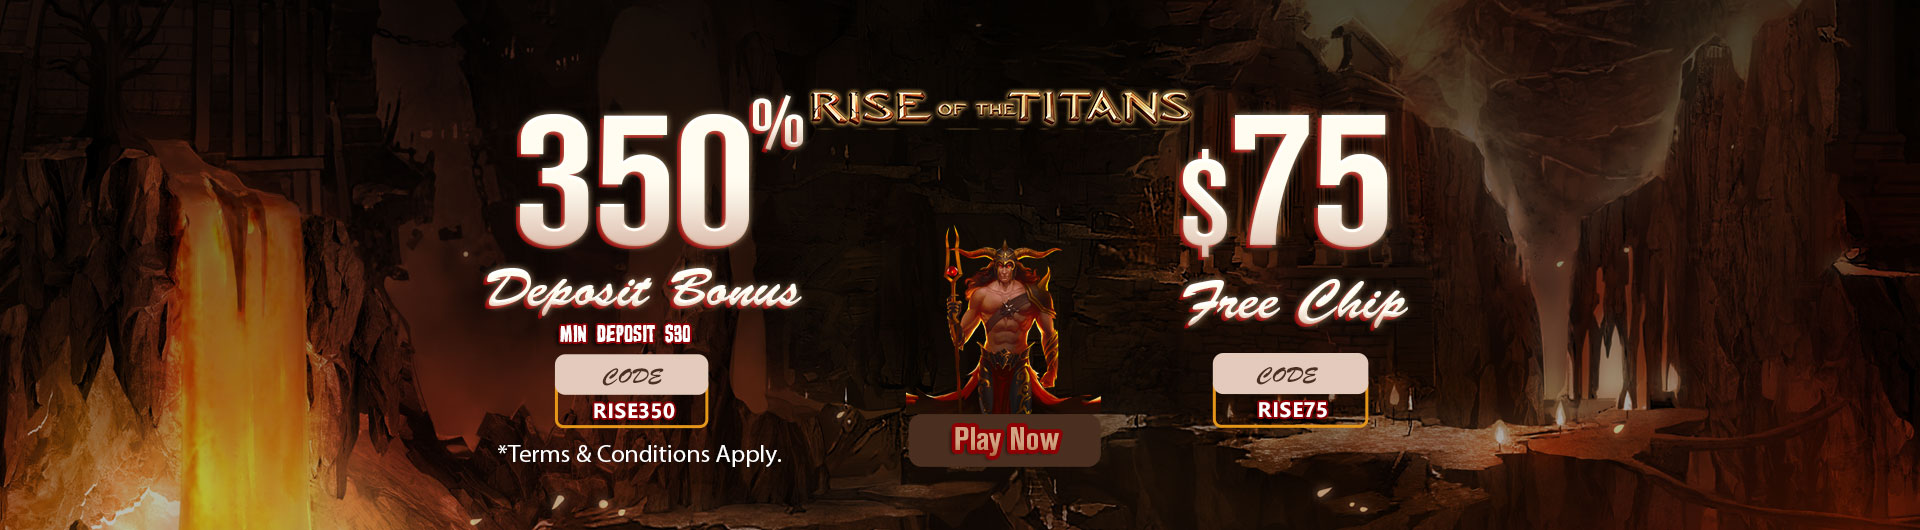 S7-Rise-of-the-Titans